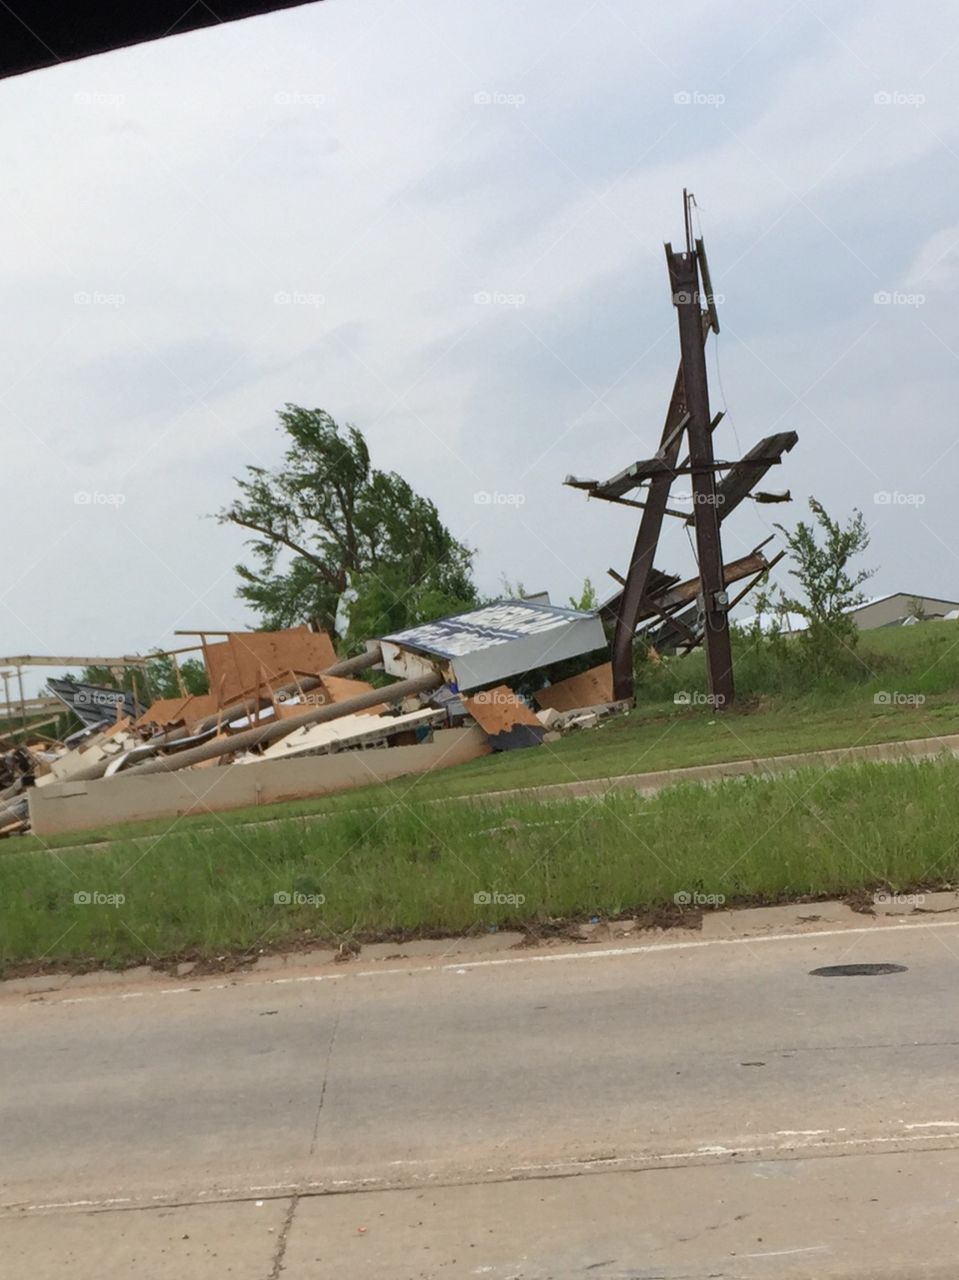 Tornado Devastation in Oklahoma . Business and homes wiped out! 